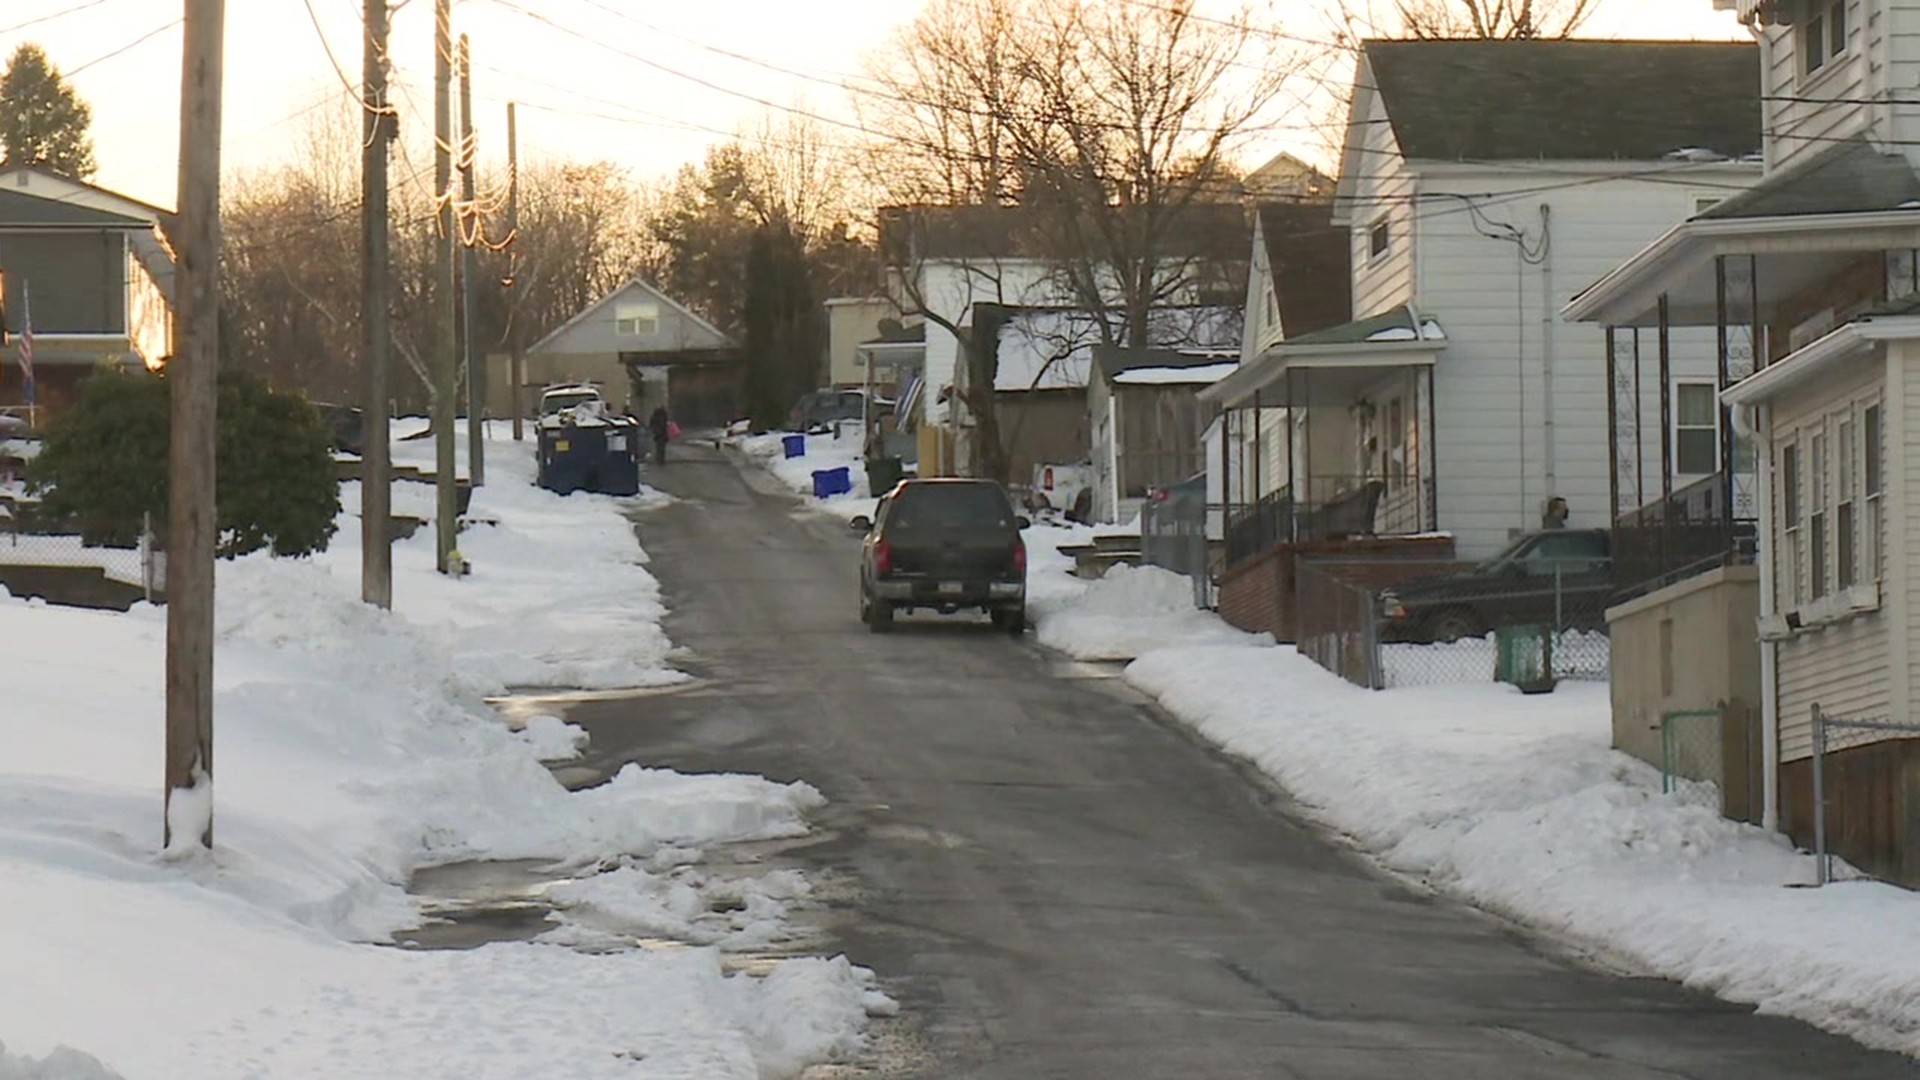 A deadly shooting is under investigation in Luzerne County. The victim is a 10-year-old boy.